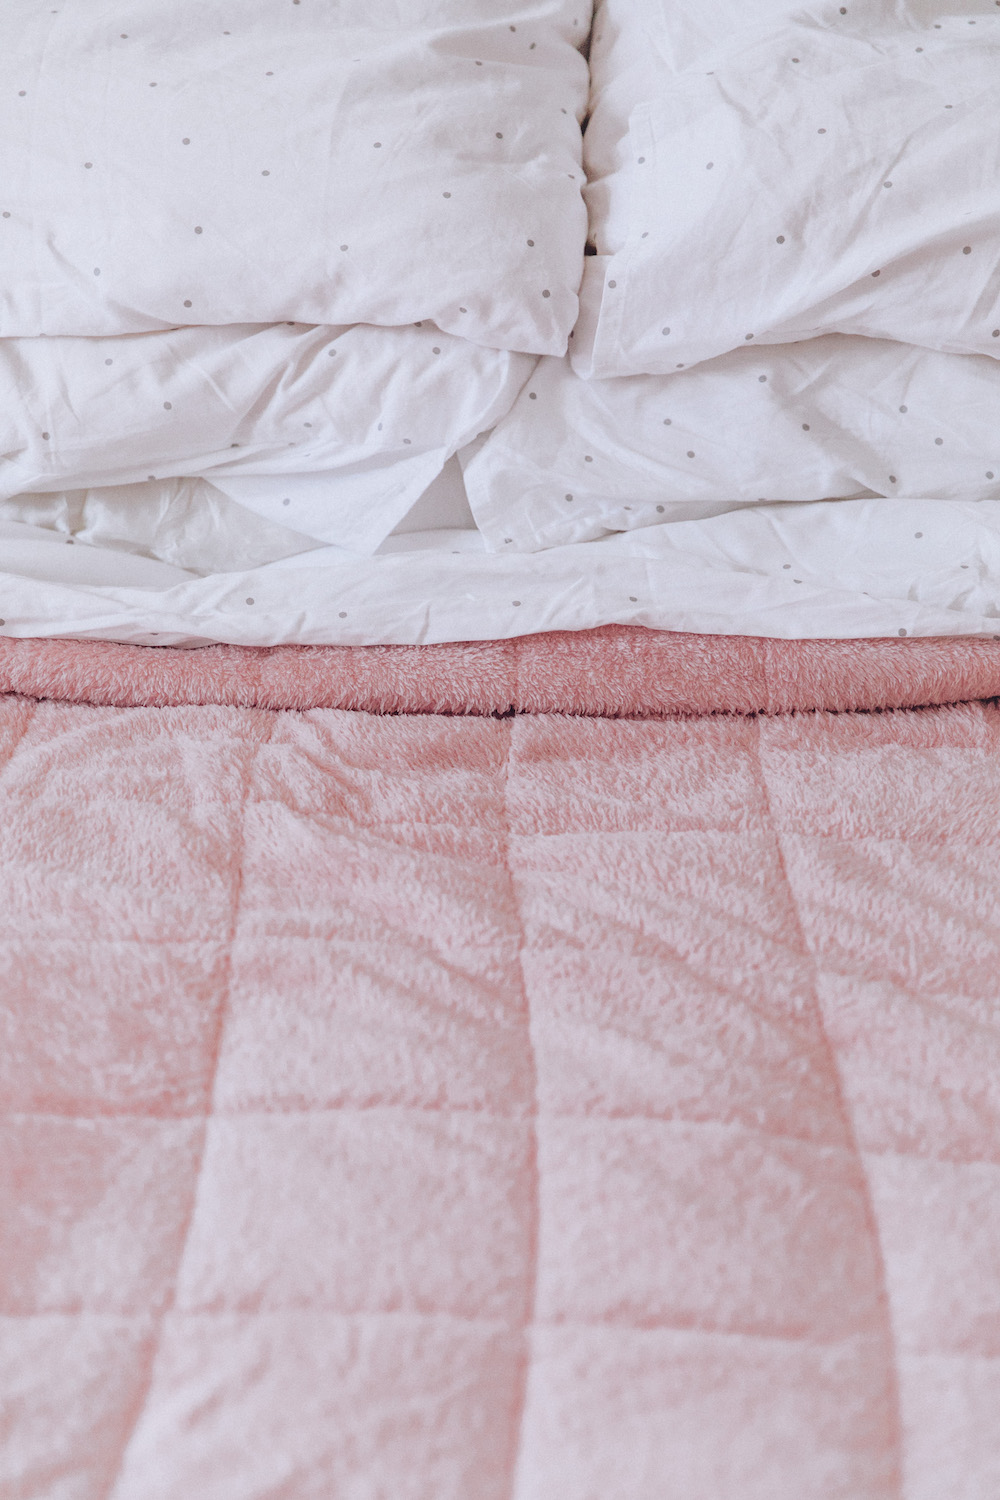 Weighted Blanket Review and Benefits for Sleeping